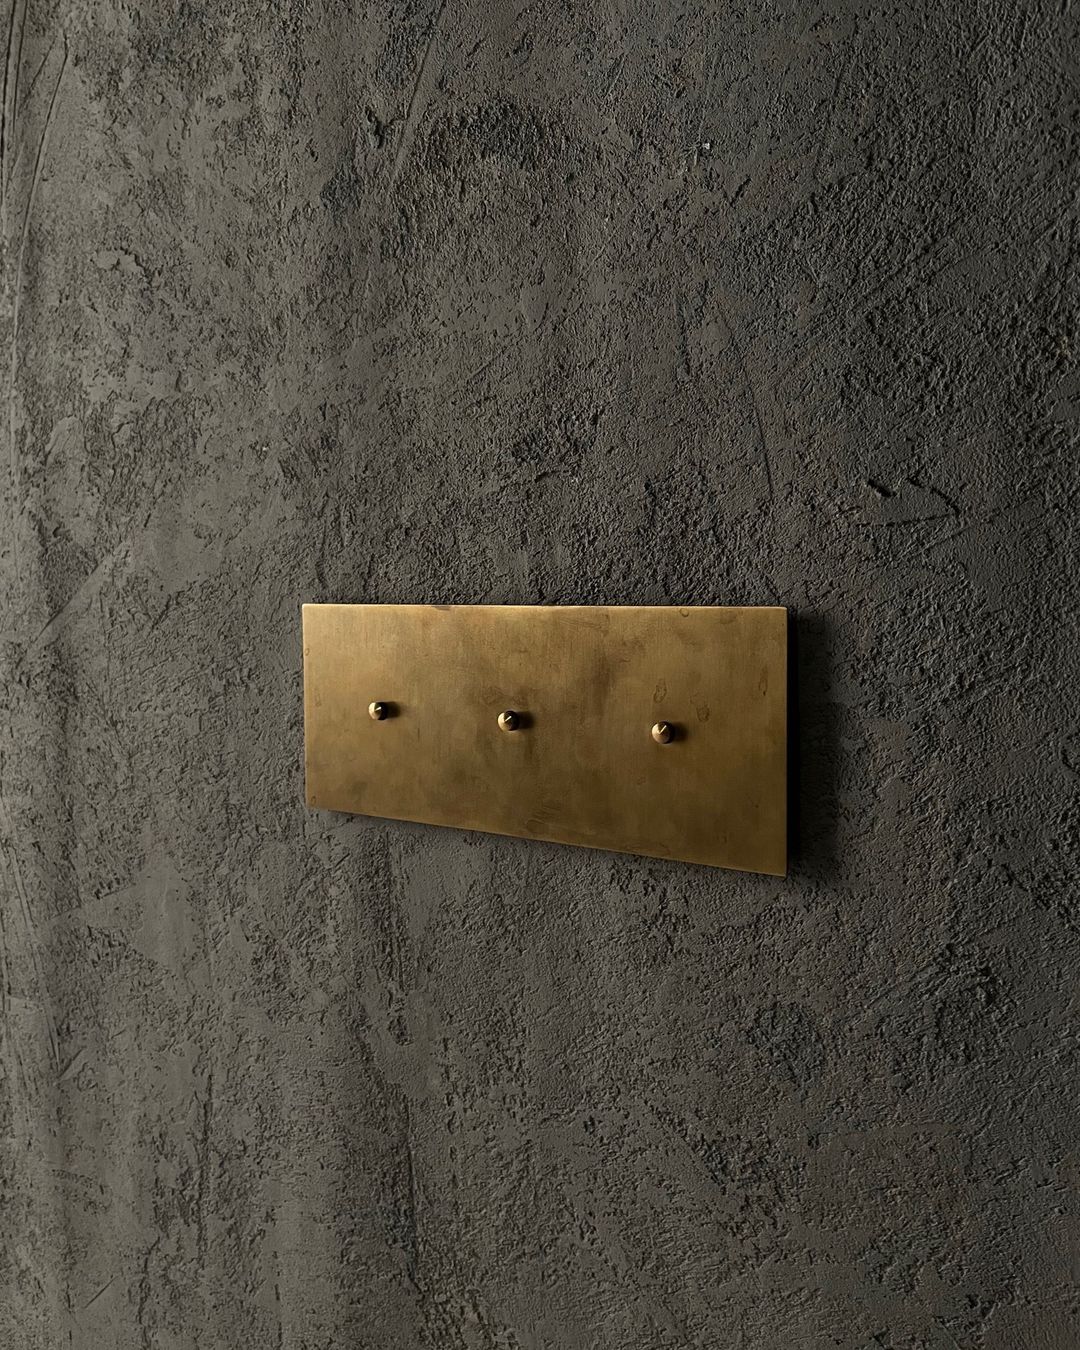 More Switch in Soft polished brass